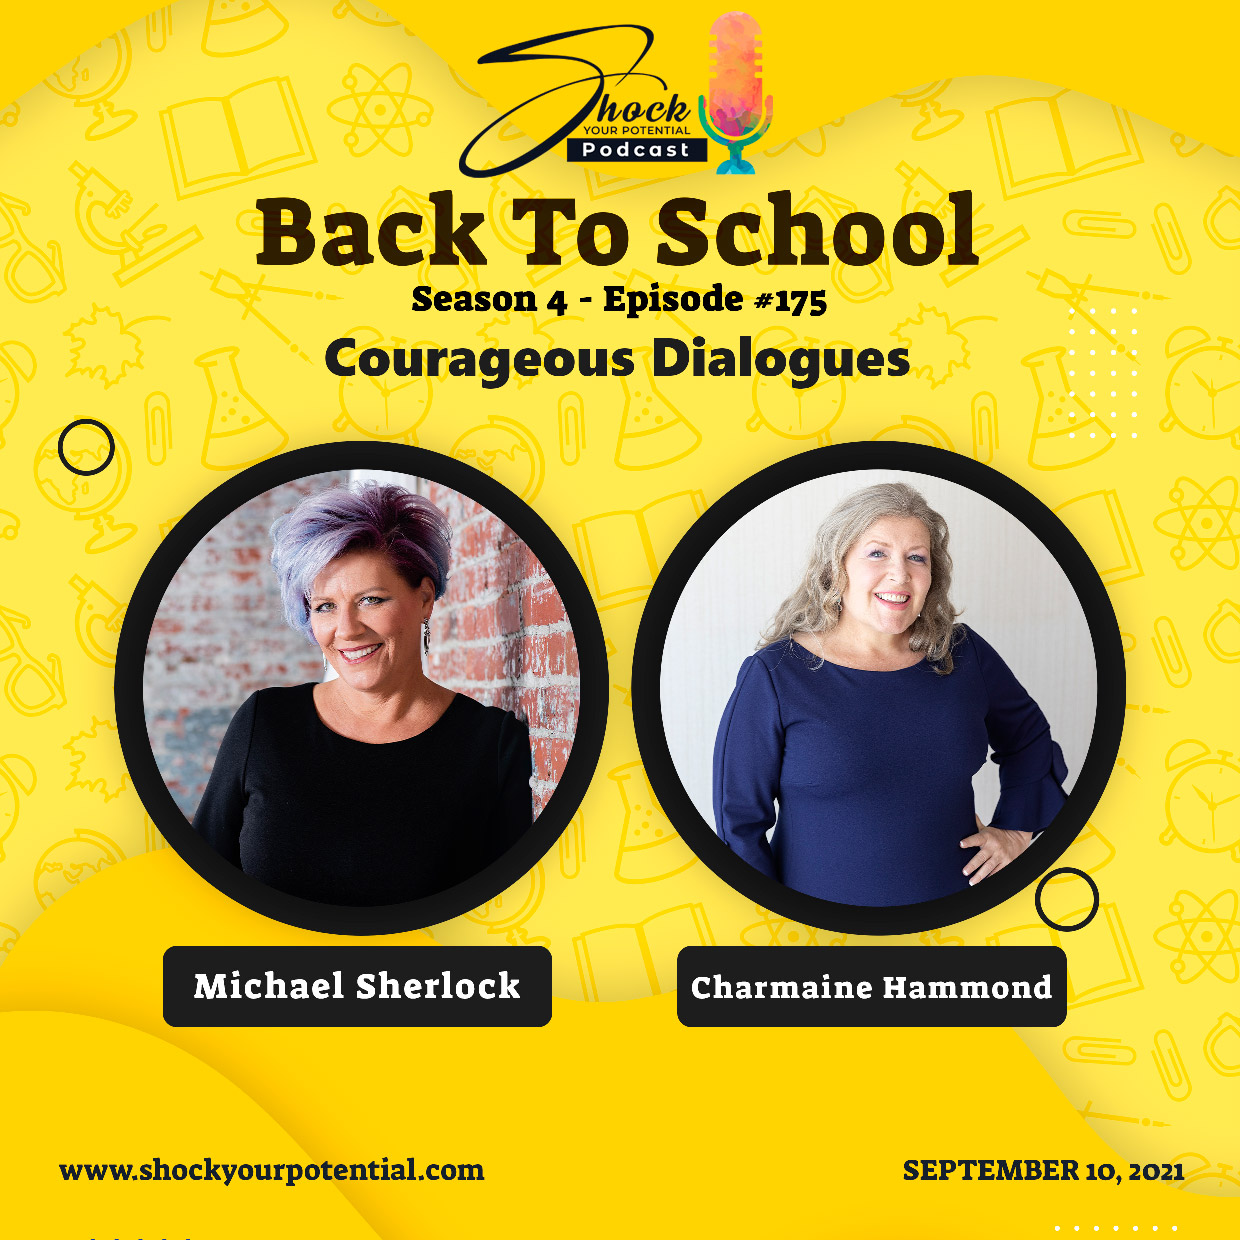 Courageous Dialogues – Charmaine Hammond